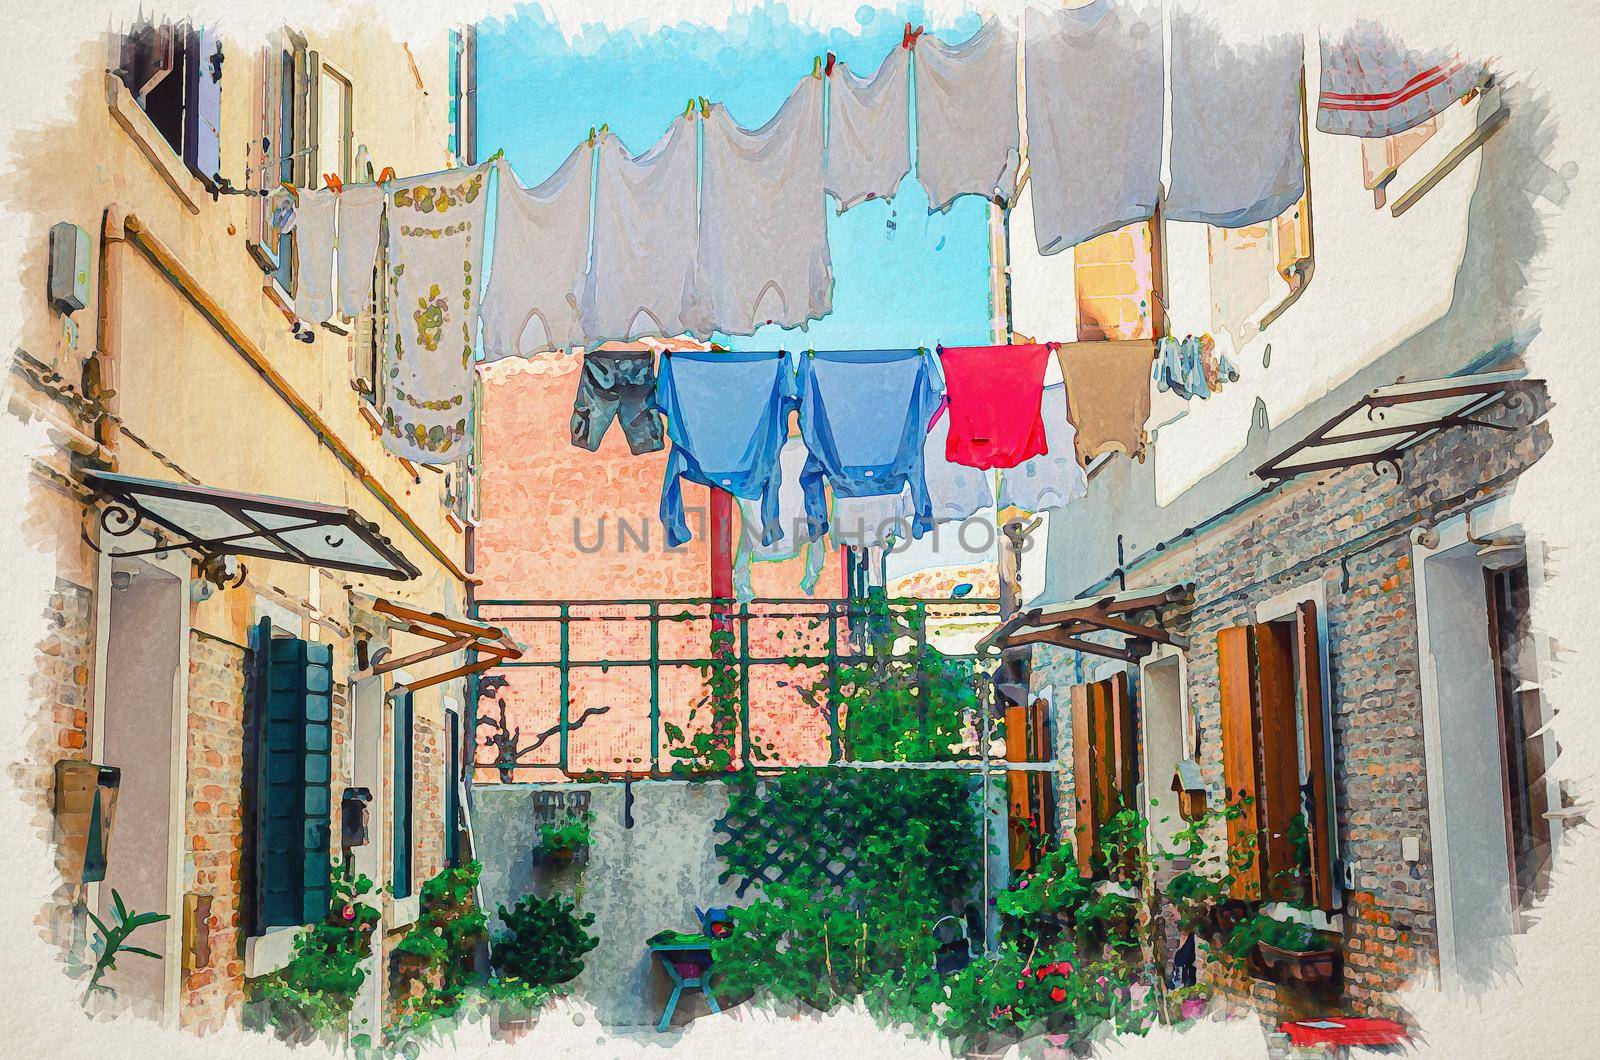 Watercolor drawing of Typical italian courtyard between buildings with brick walls, green plants and flowers in flowerpot, wet clothes hanging on cord, Murano islands, Veneto Region, Northern Italy